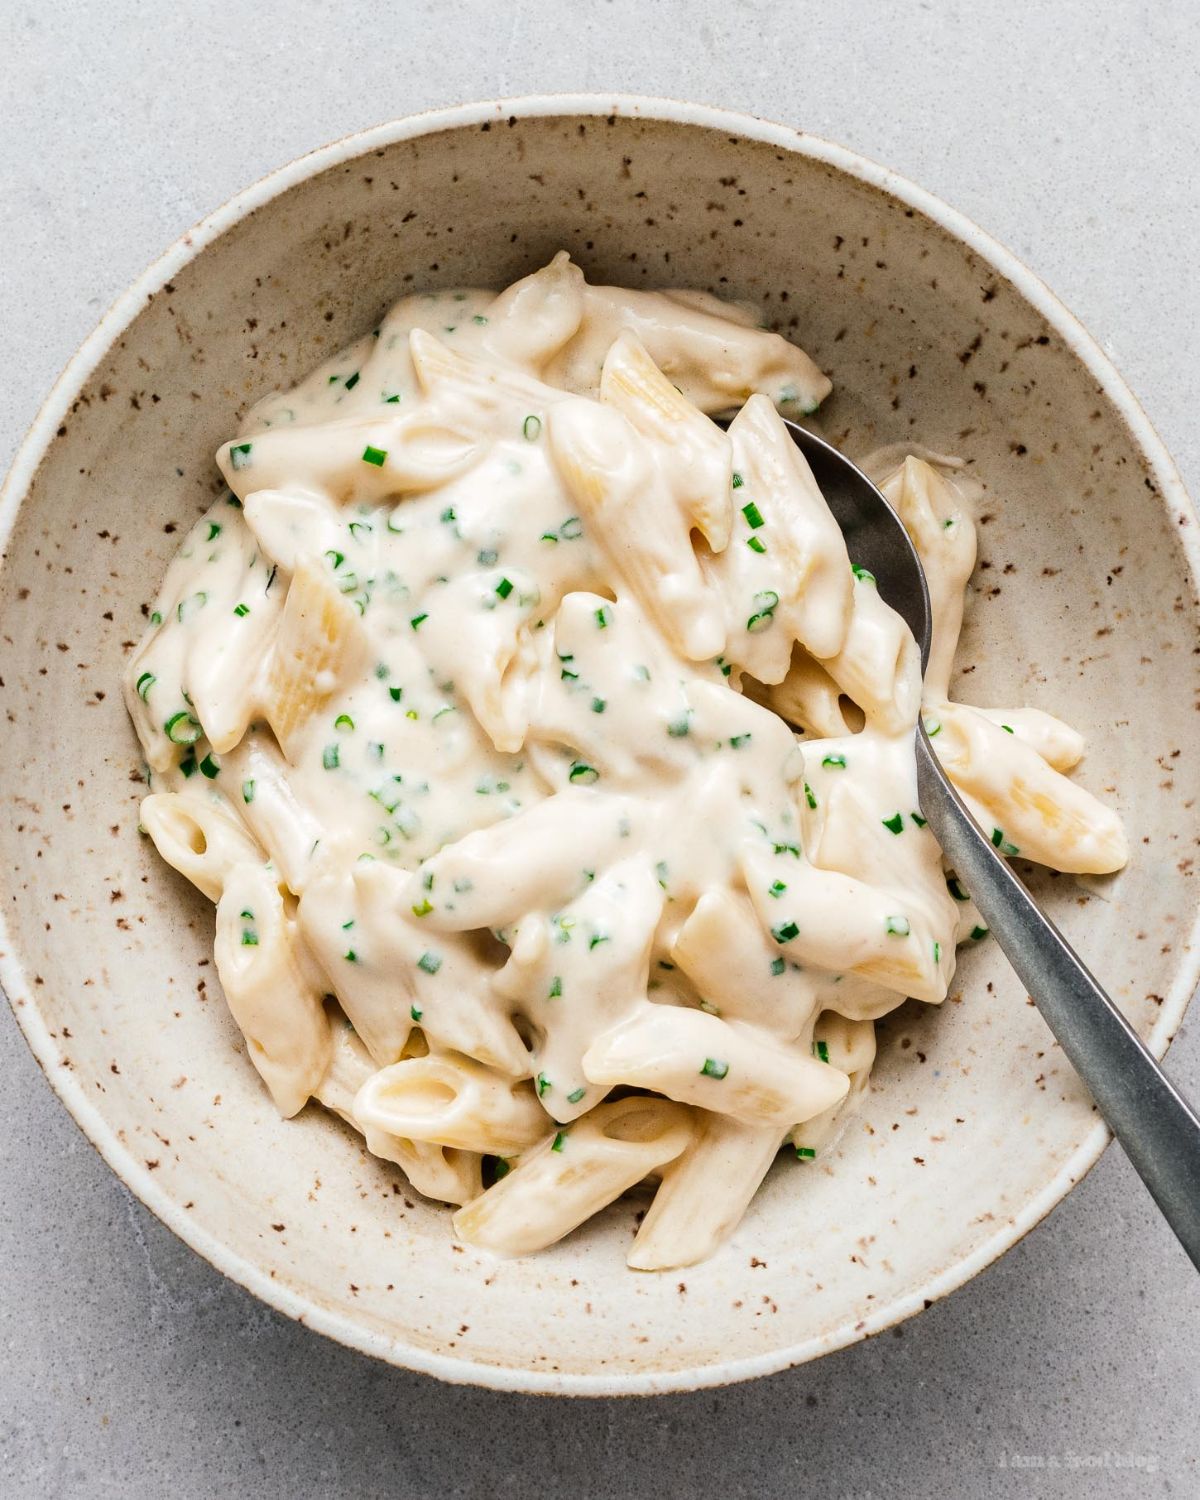 Juicy sour cream and onion pasta in a gray bowl with a spoon.